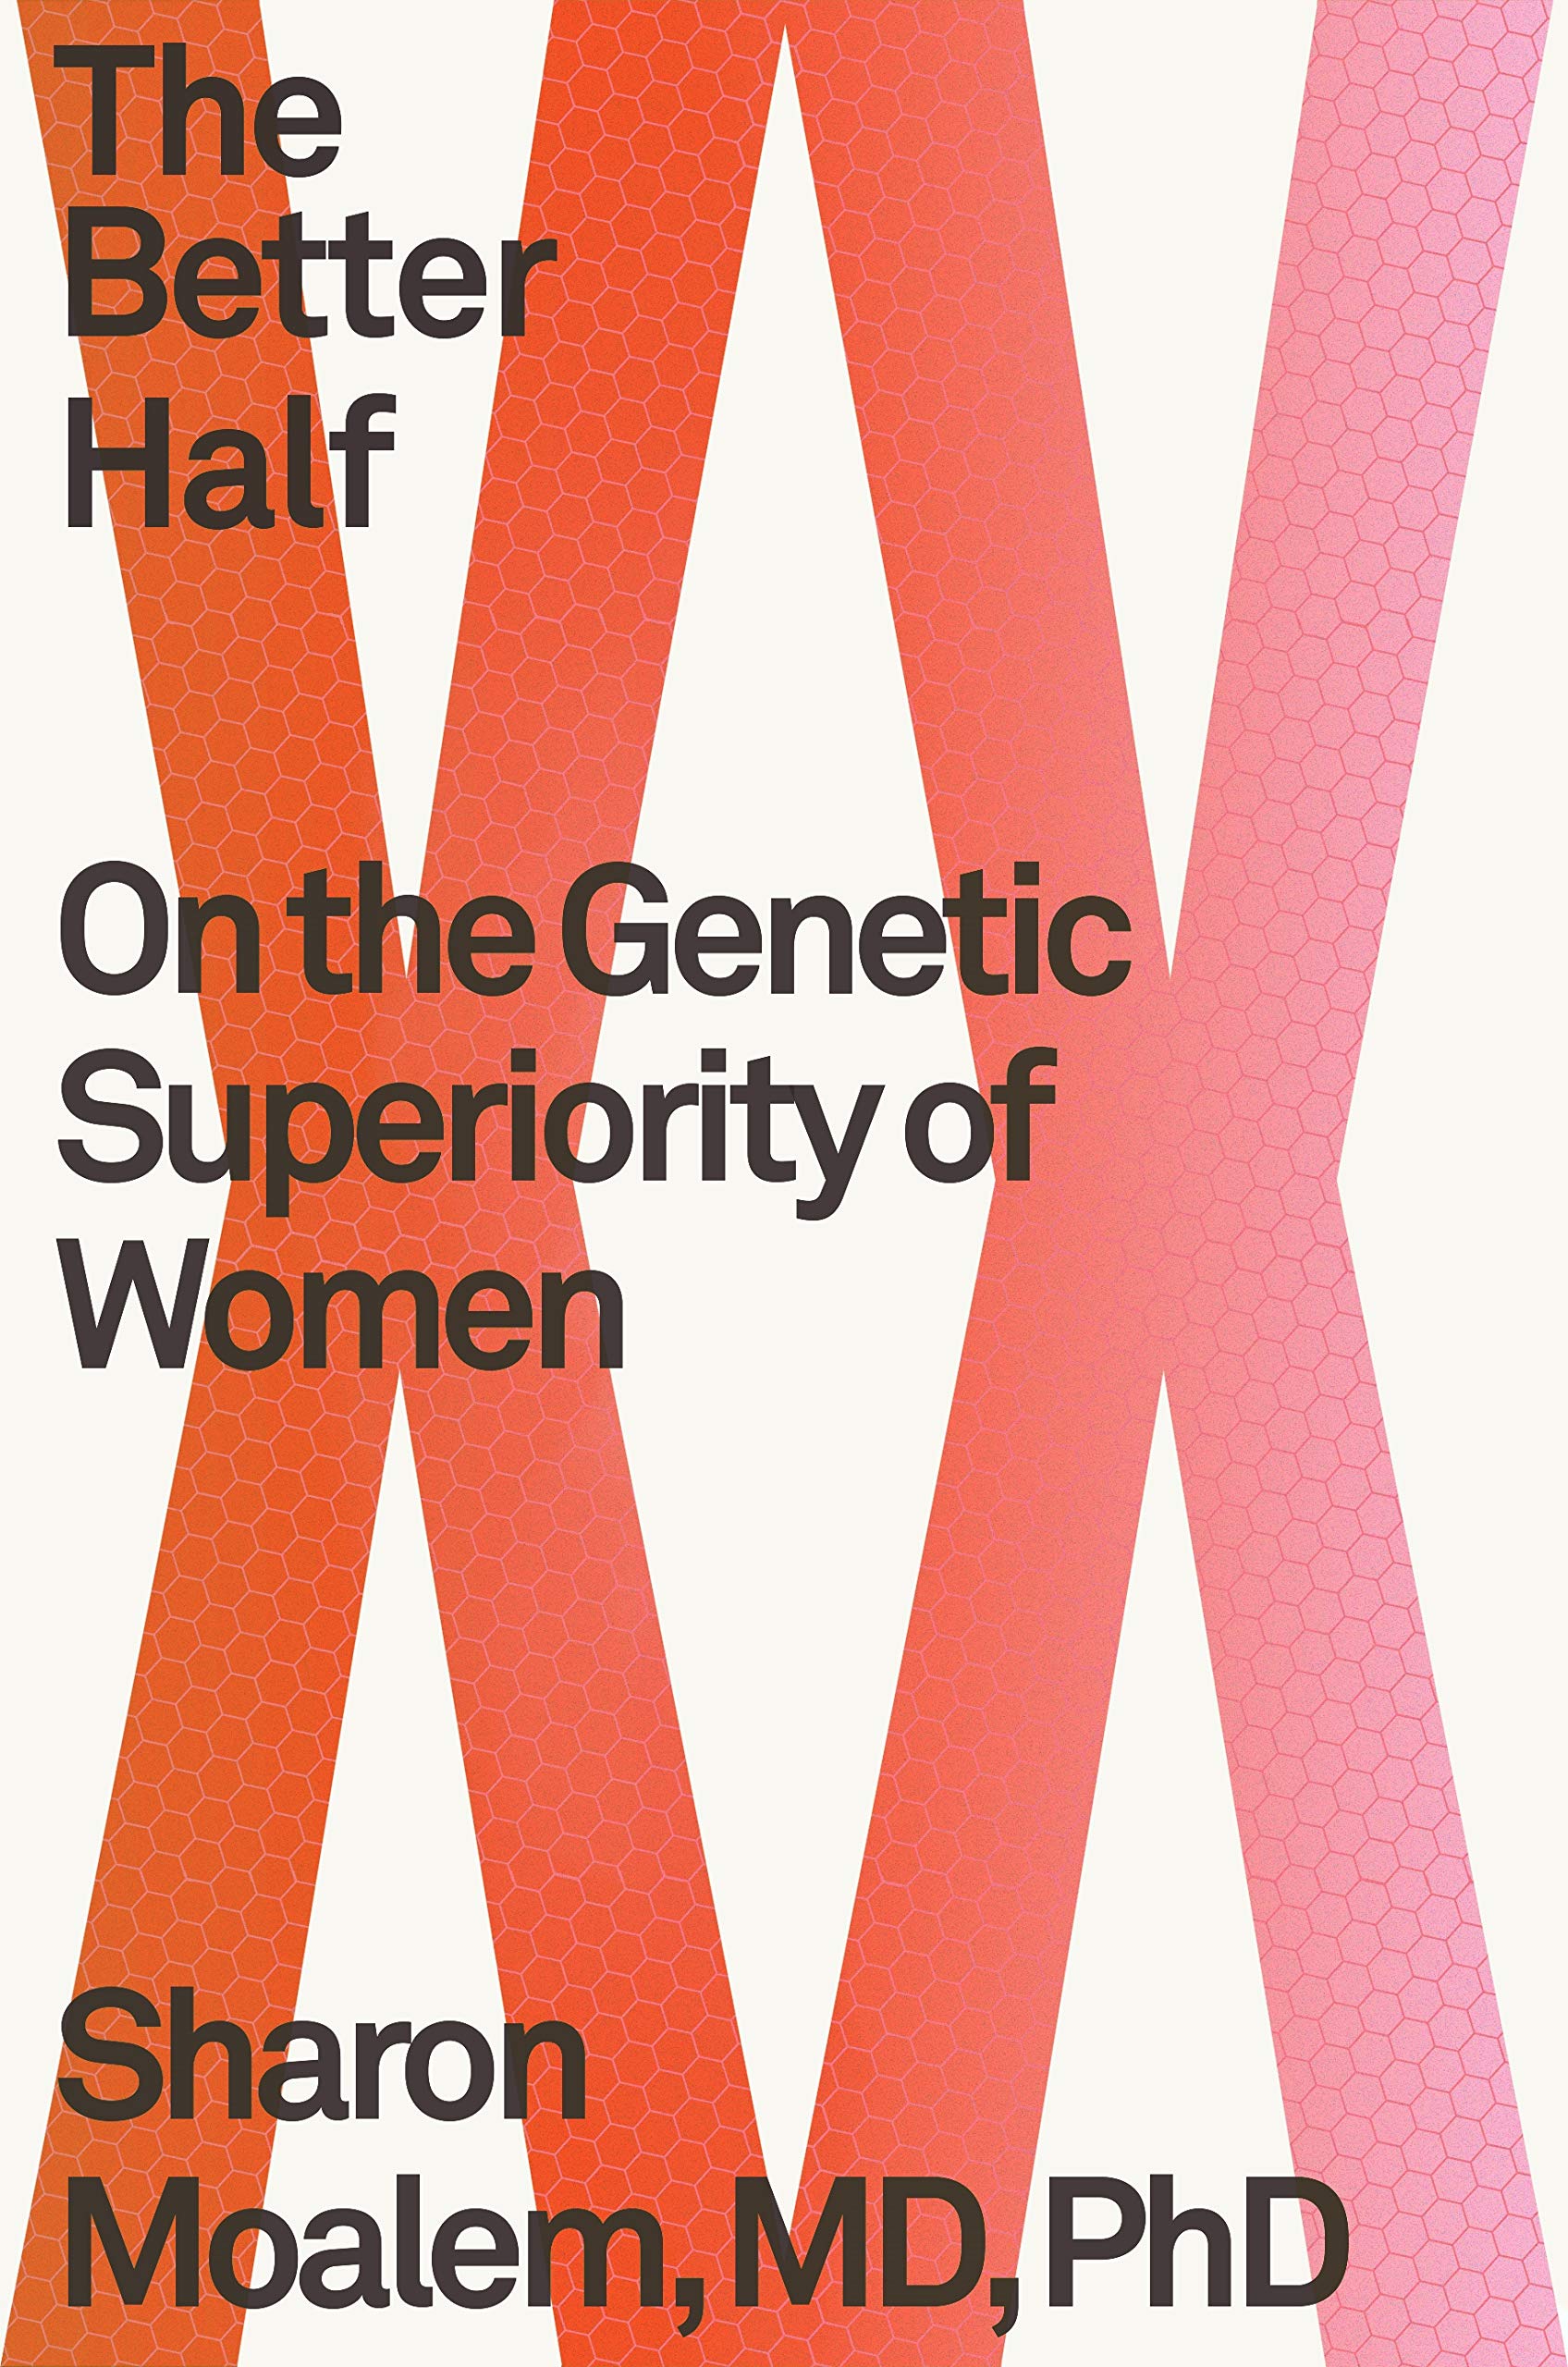 Image for "The Better Half: on the genetic superiority of women"